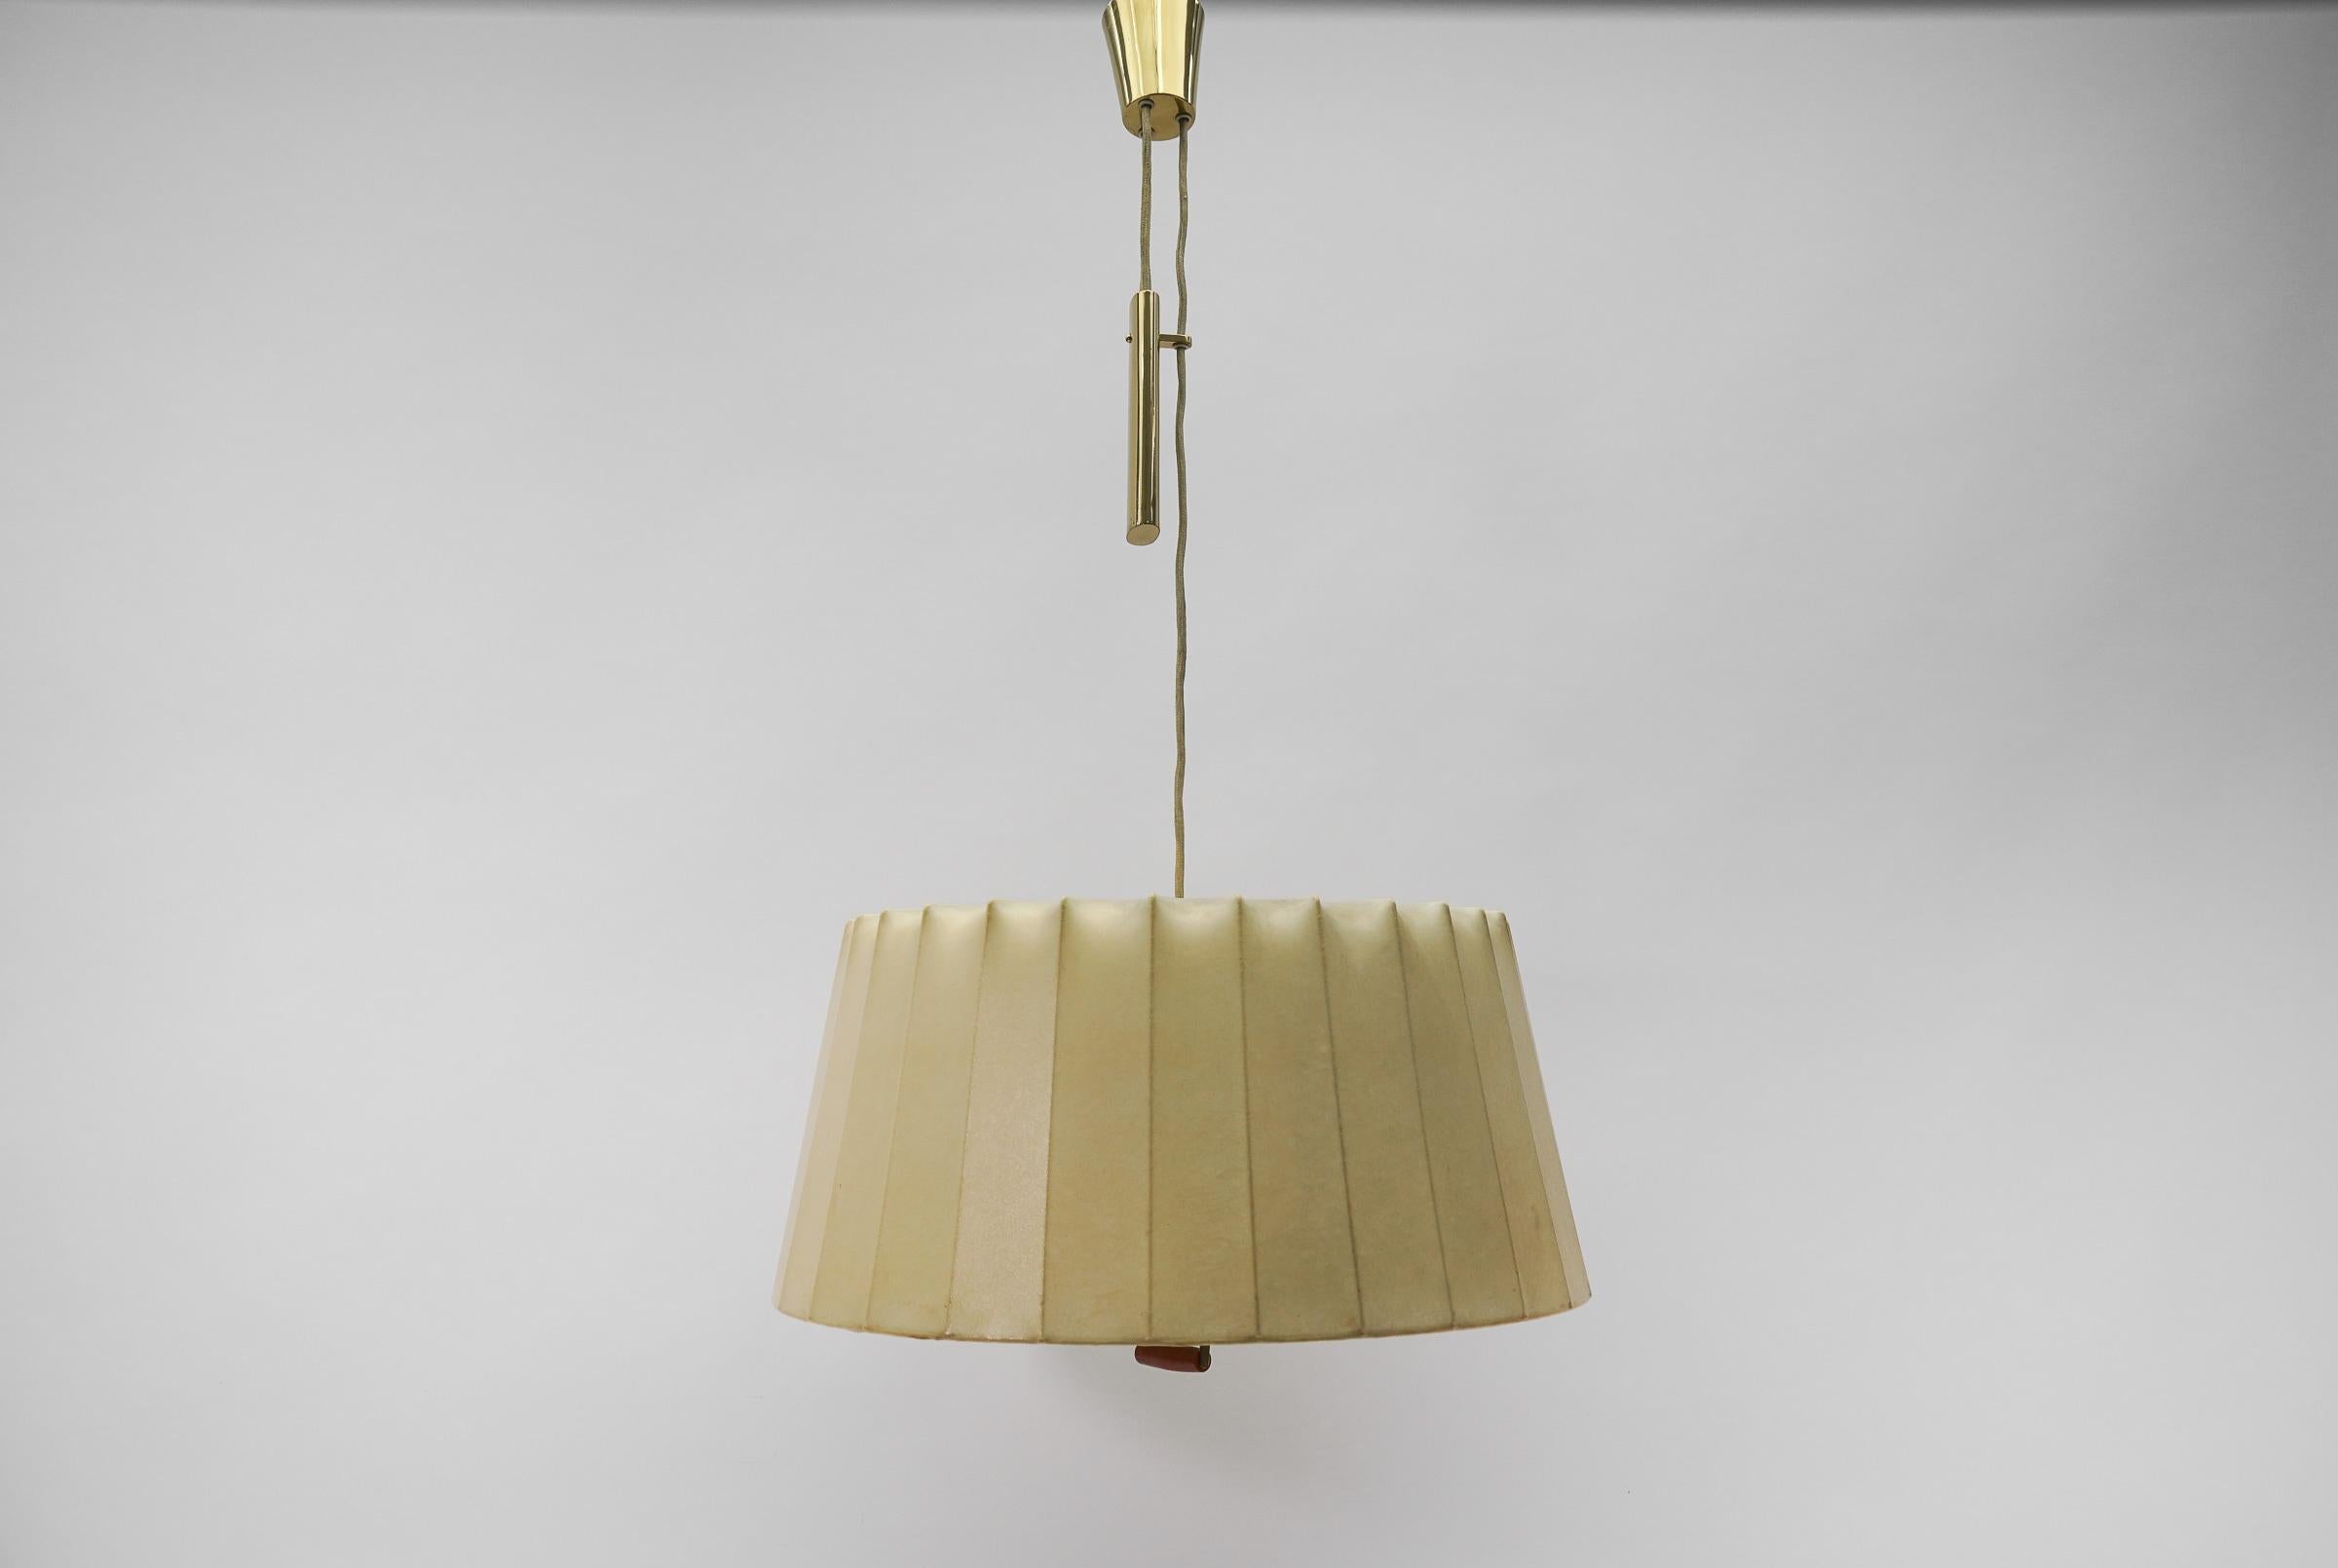 Lovely Cocoon Counterweight Hanging Lamp by Münchener Werkstätten, 1950s Germany For Sale 3